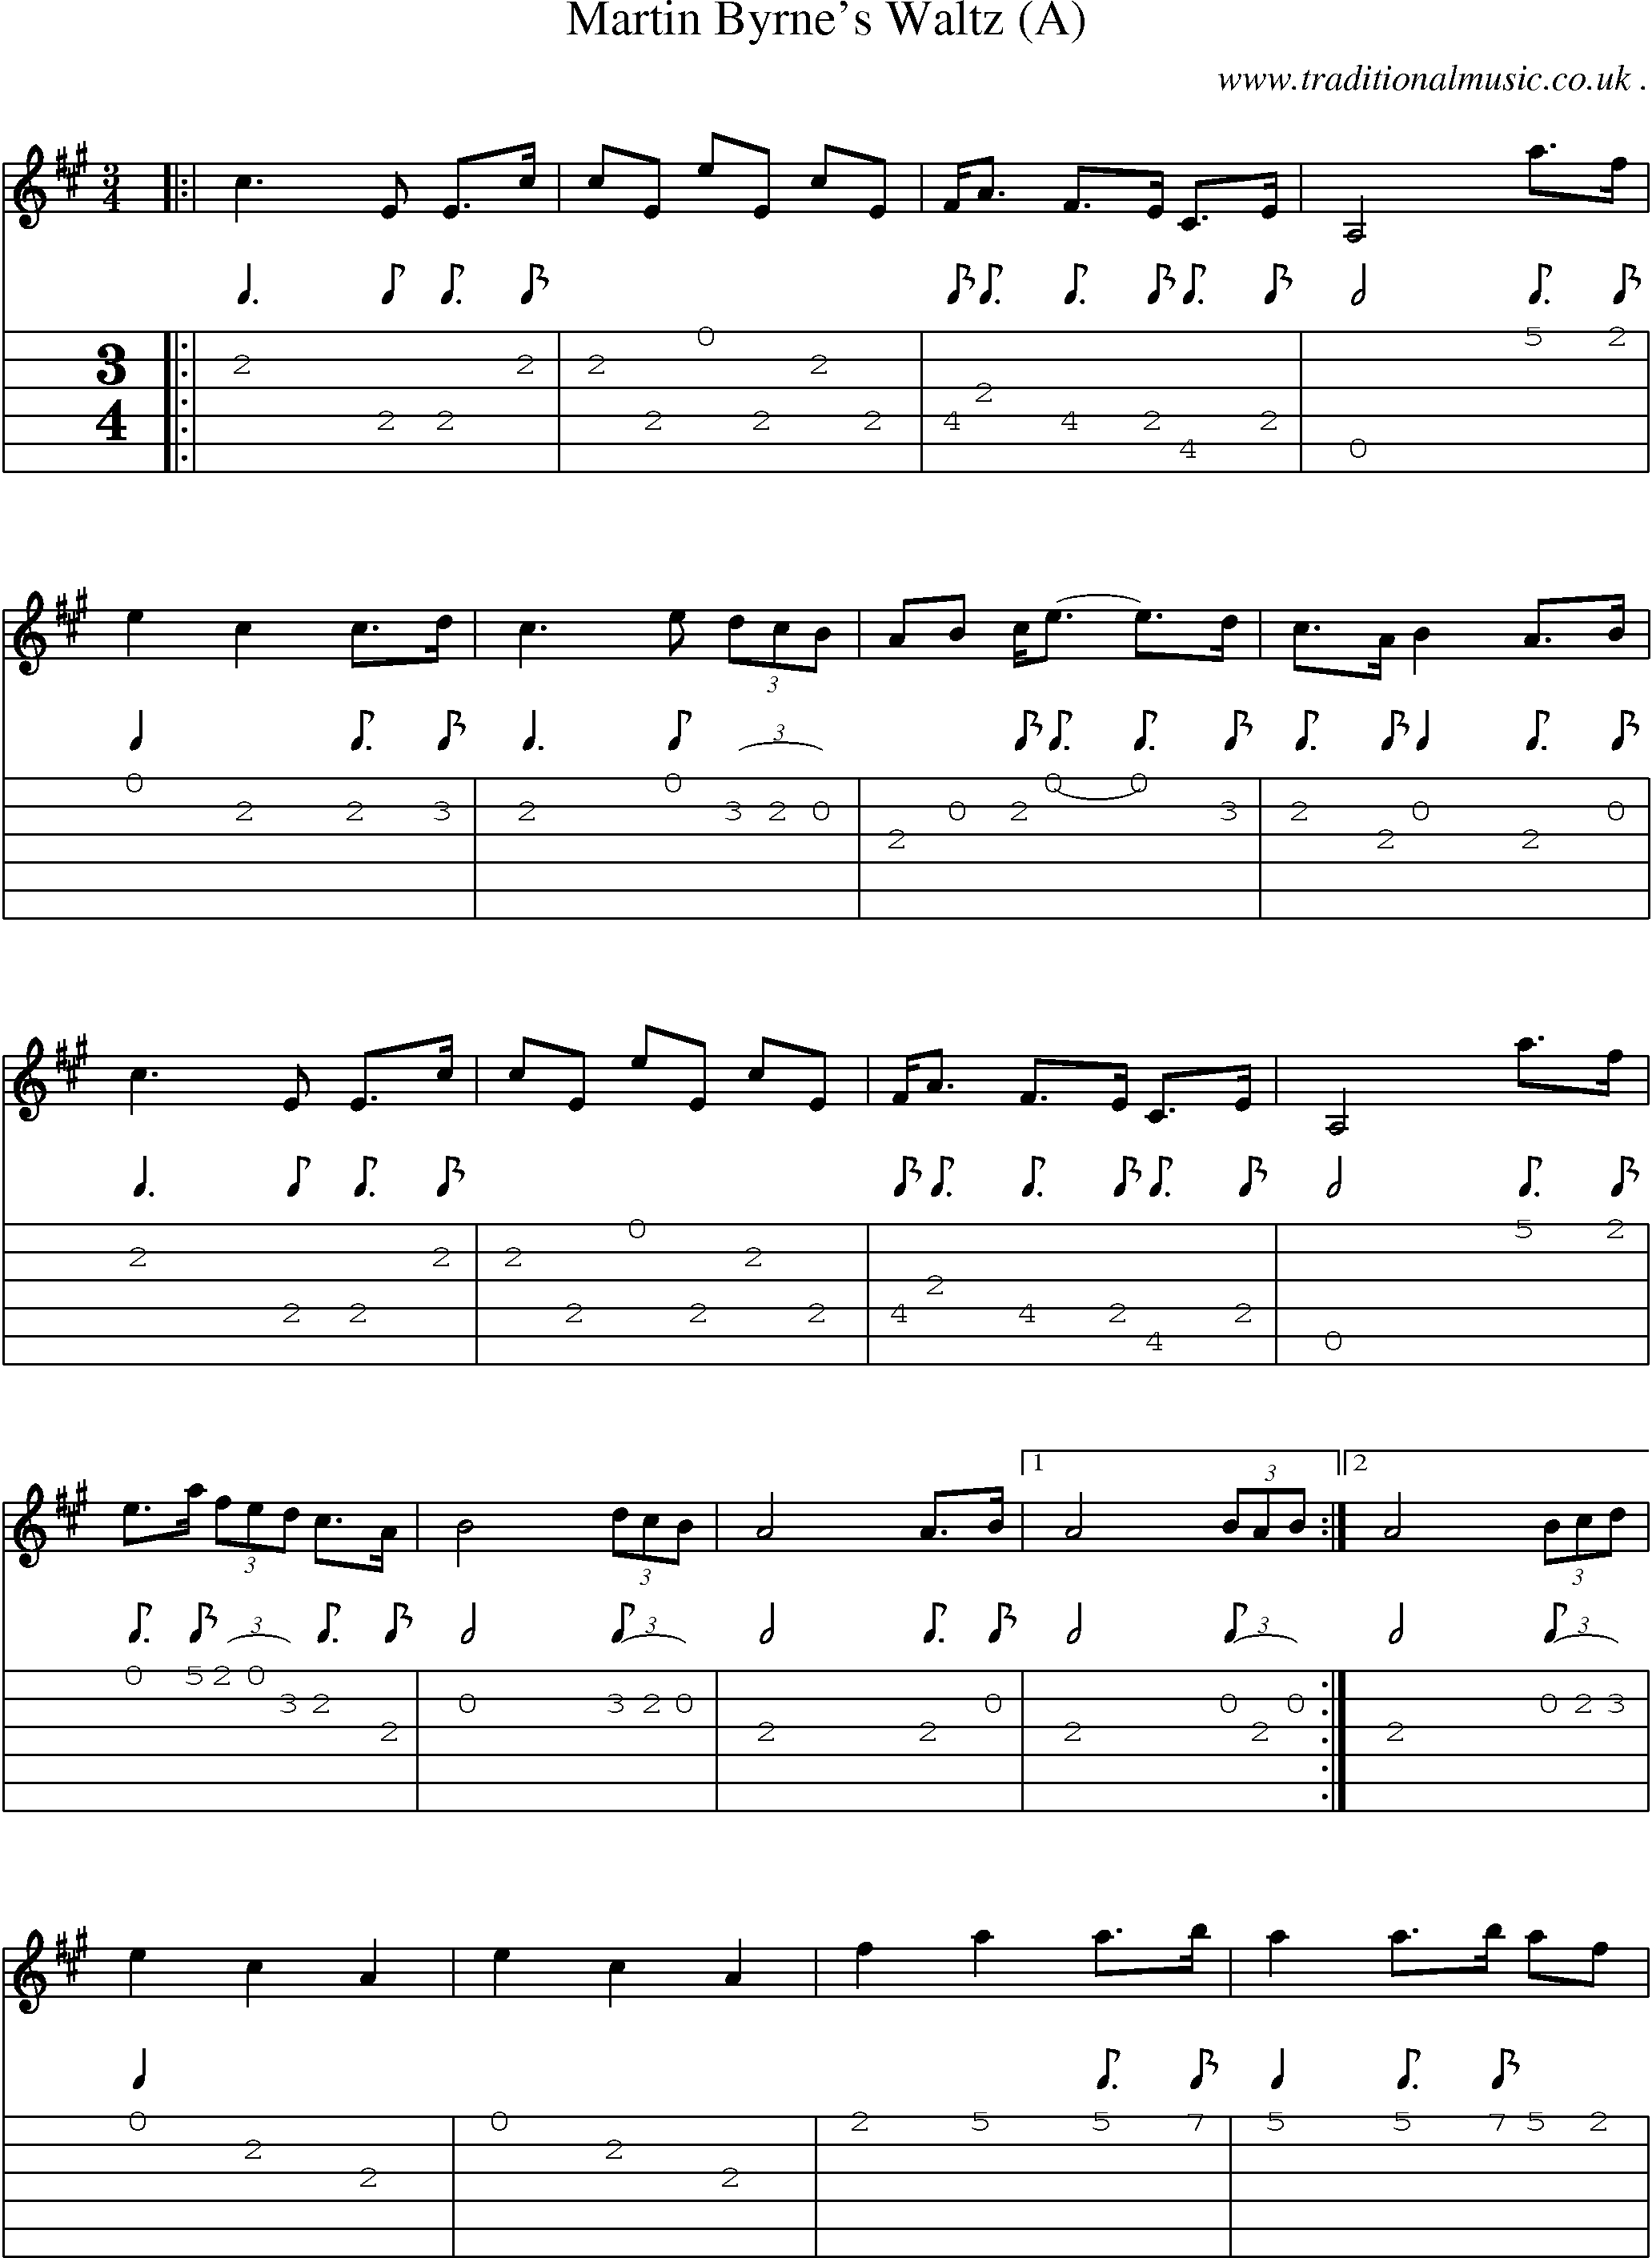 Sheet-Music and Guitar Tabs for Martin Byrnes Waltz (a)